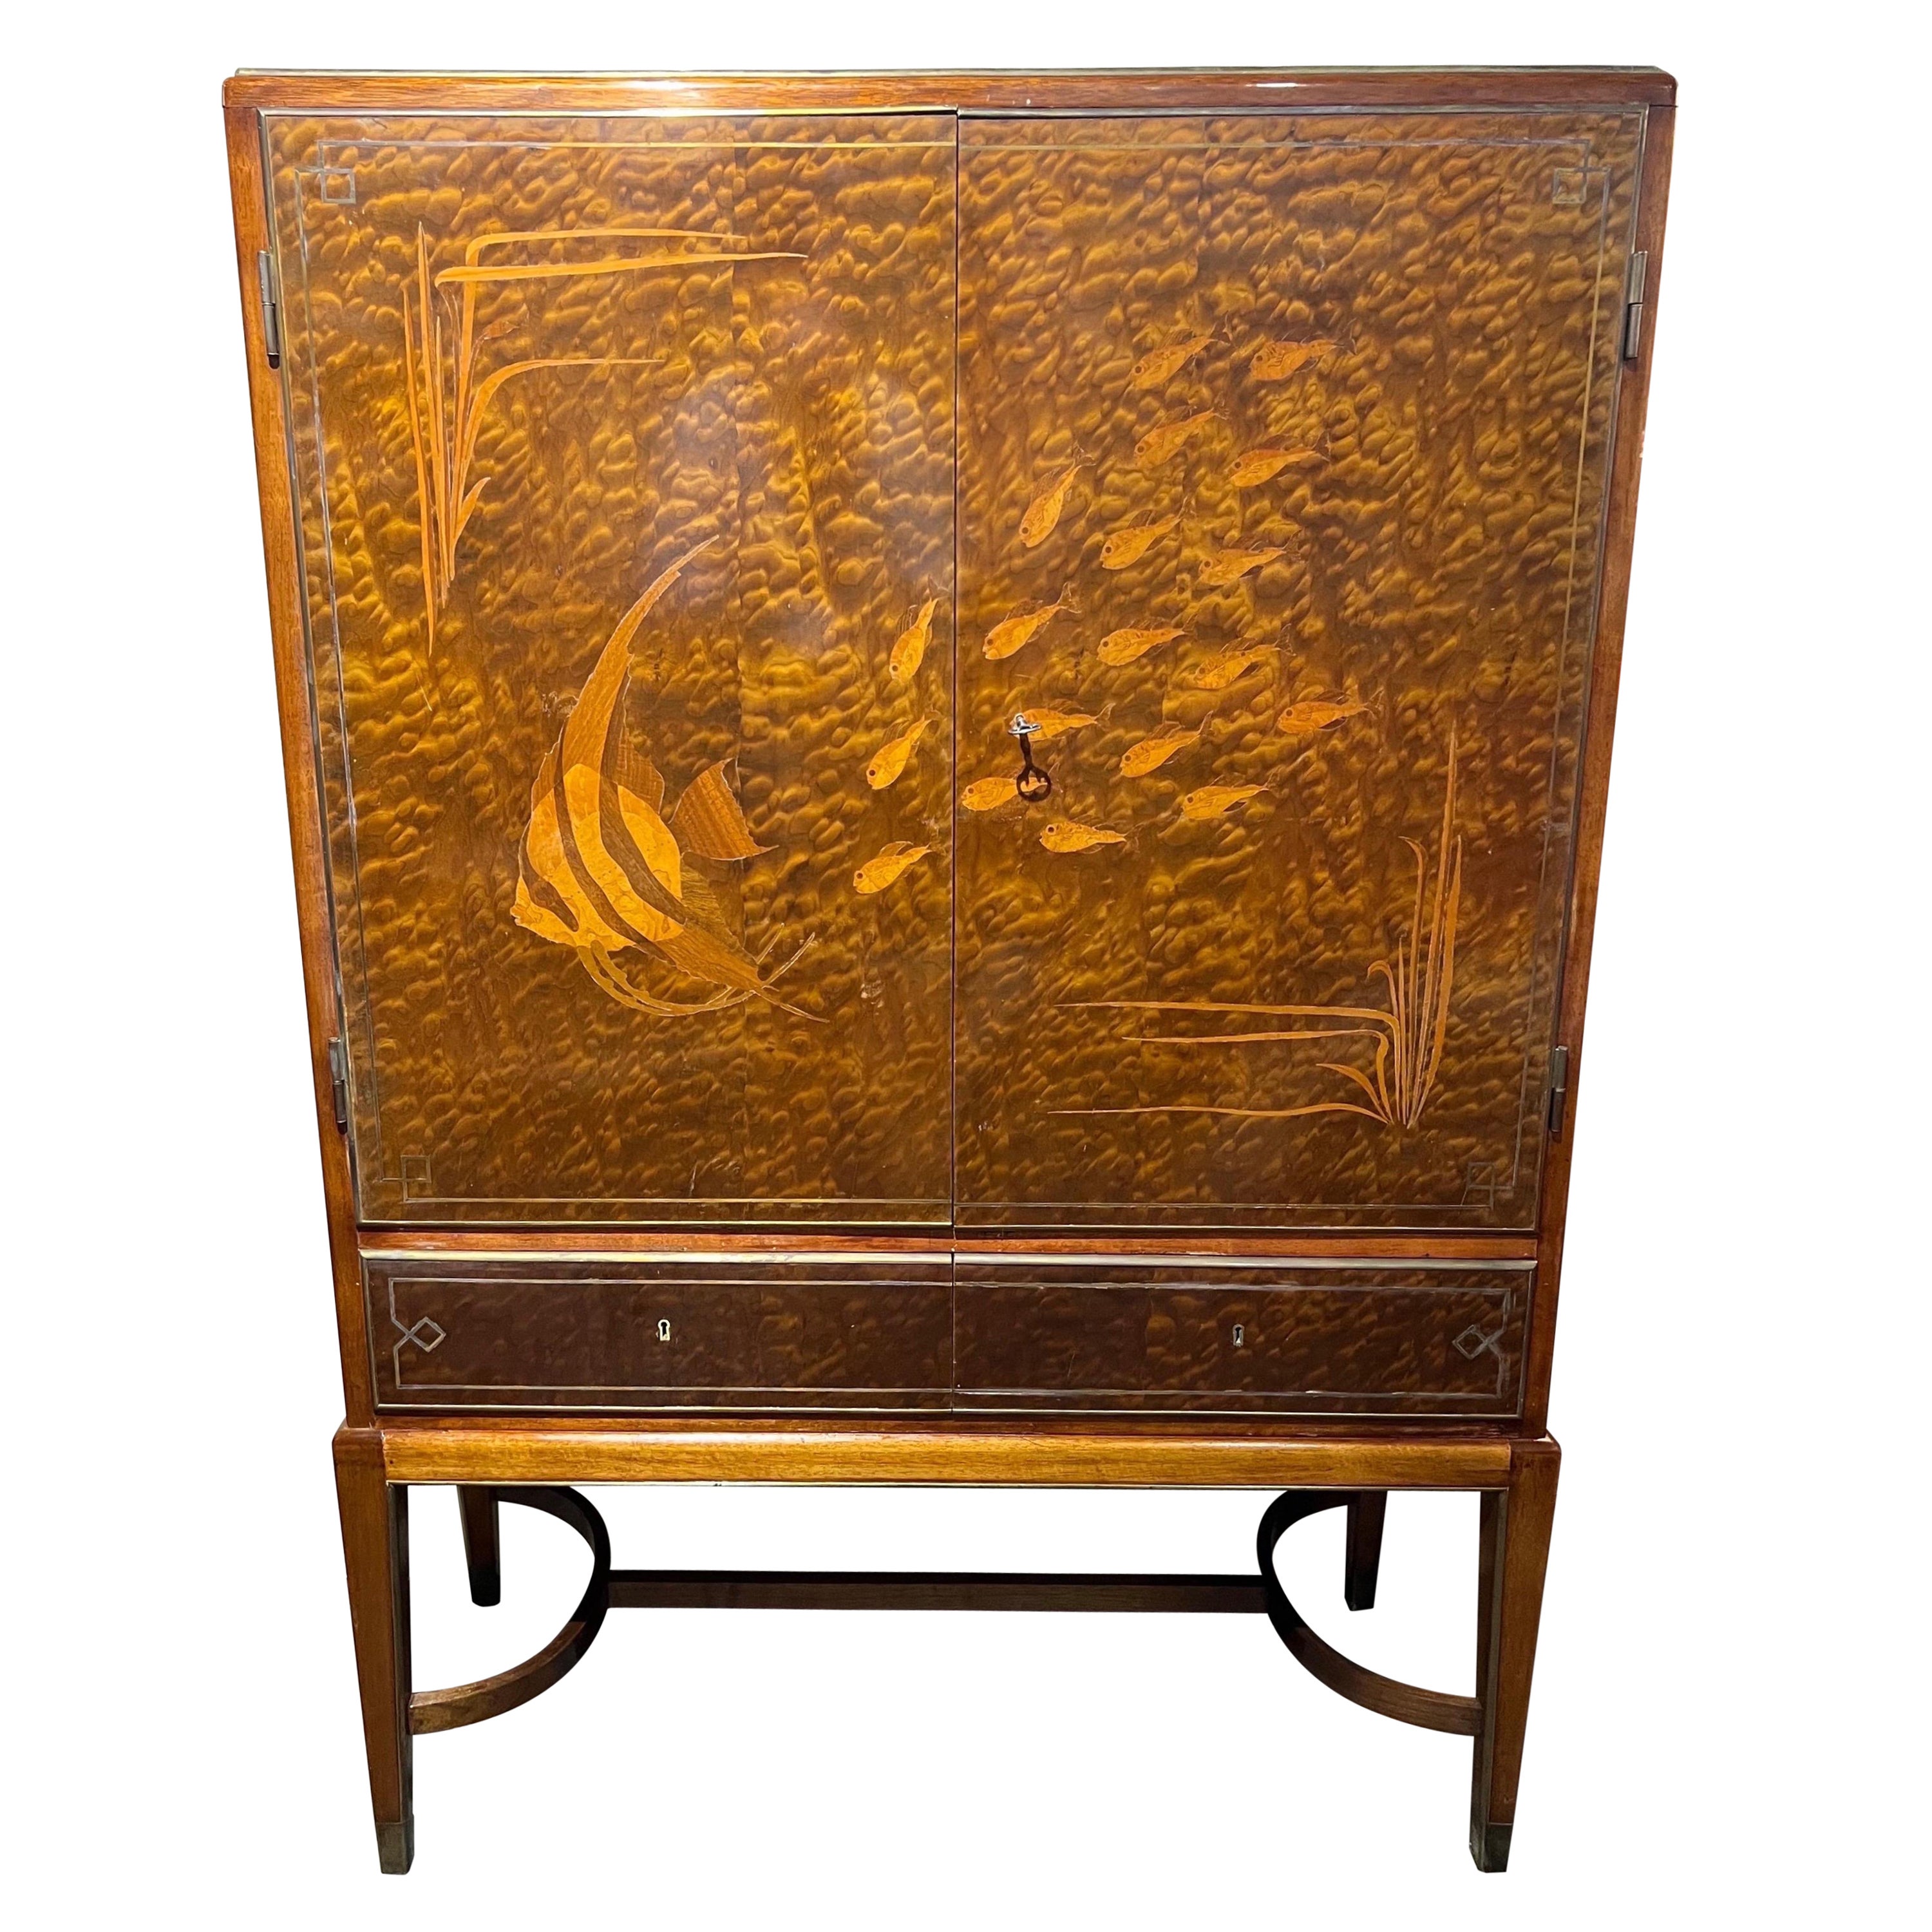 Spectacular French Art Deco Brass Mounted Fish Inlaid Bar Cabinet with Drawers For Sale